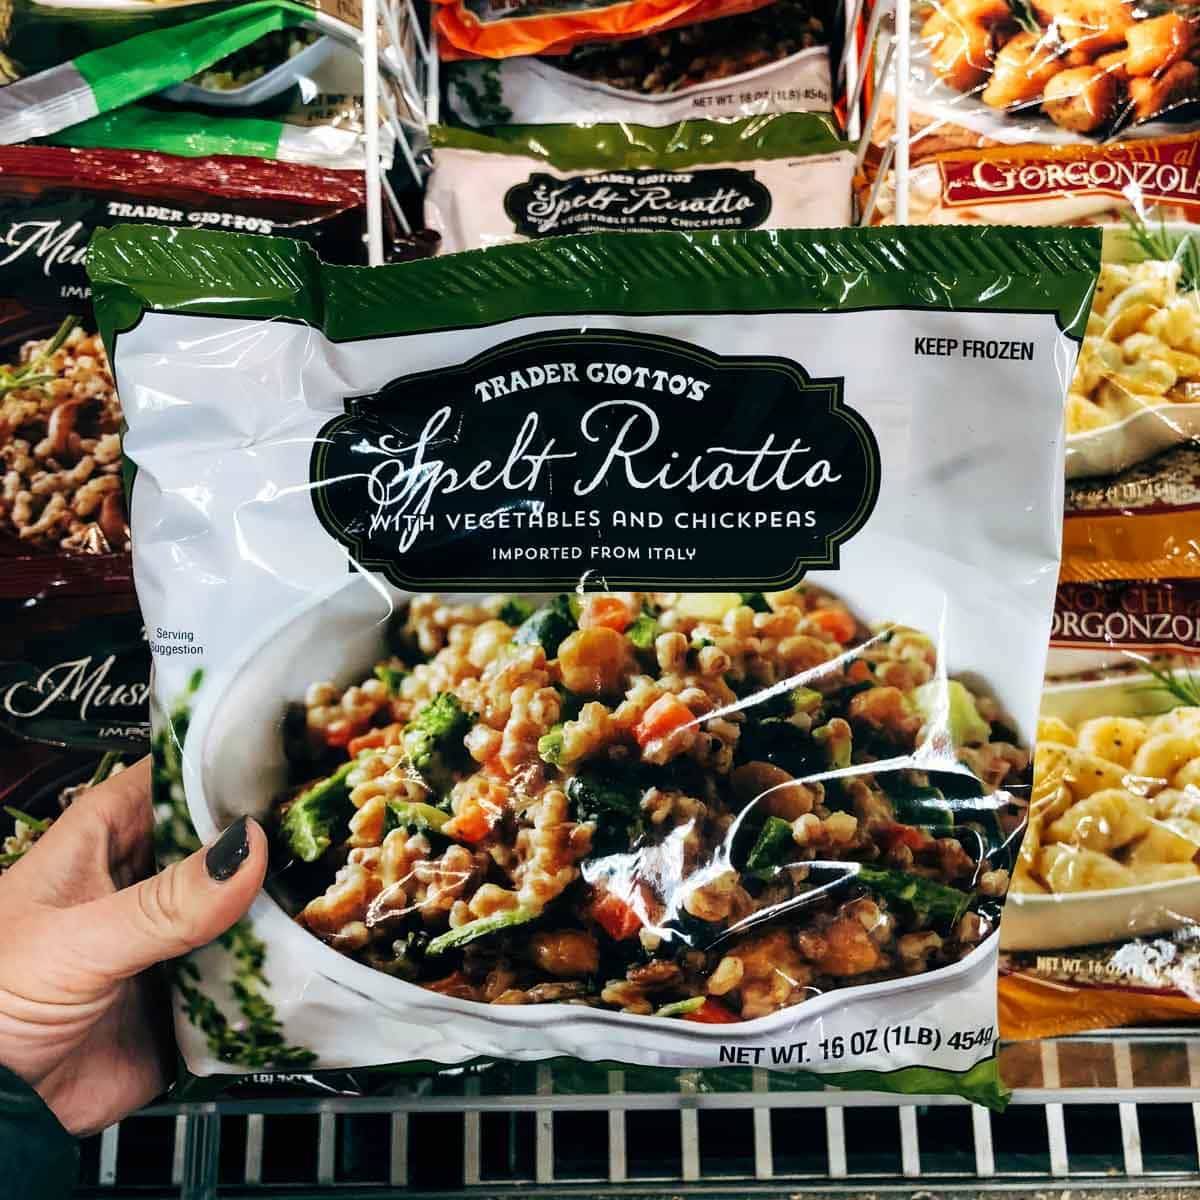 risotto with vegetables and chickpeas in a bag